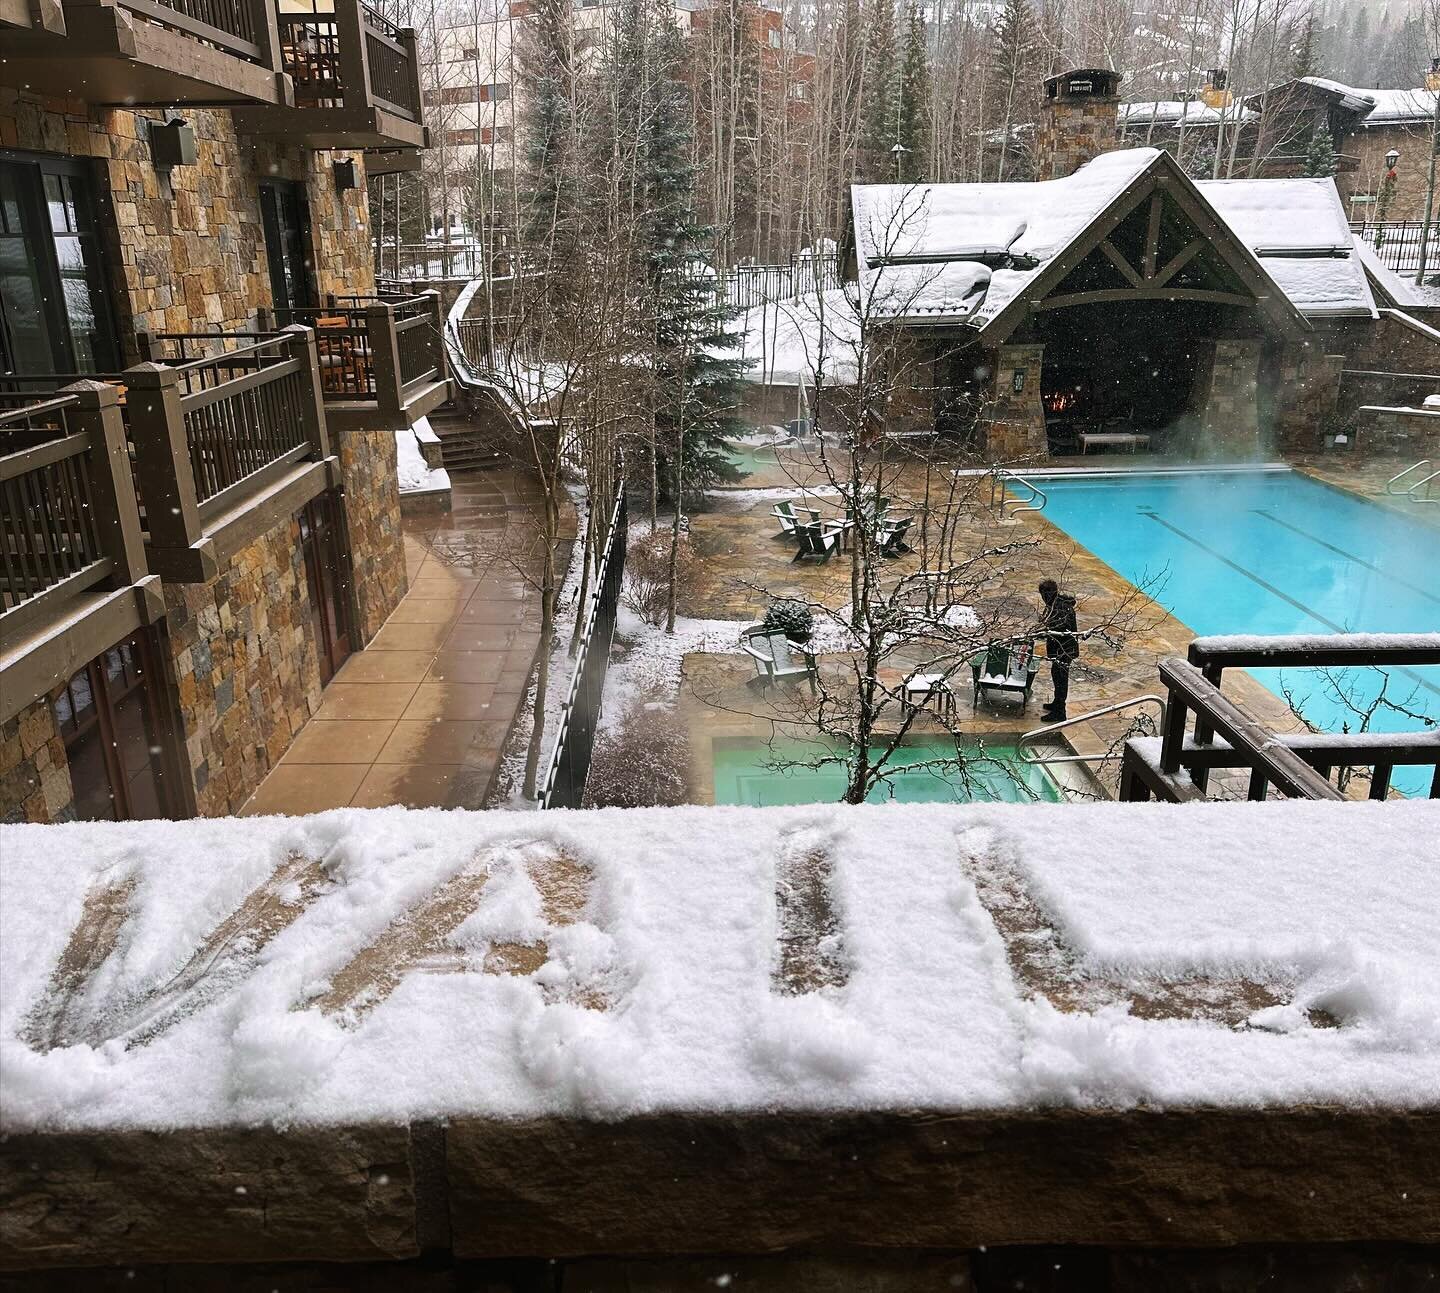 After a day of skiing, there&rsquo;s no better place to relax than at the @fsvail. 
Soak outside in one of the two hot tubs or heated pool. Or enjoy the Vail River Massage at the hotel&rsquo;s five star spa. 
The ski concierge can do everything from 